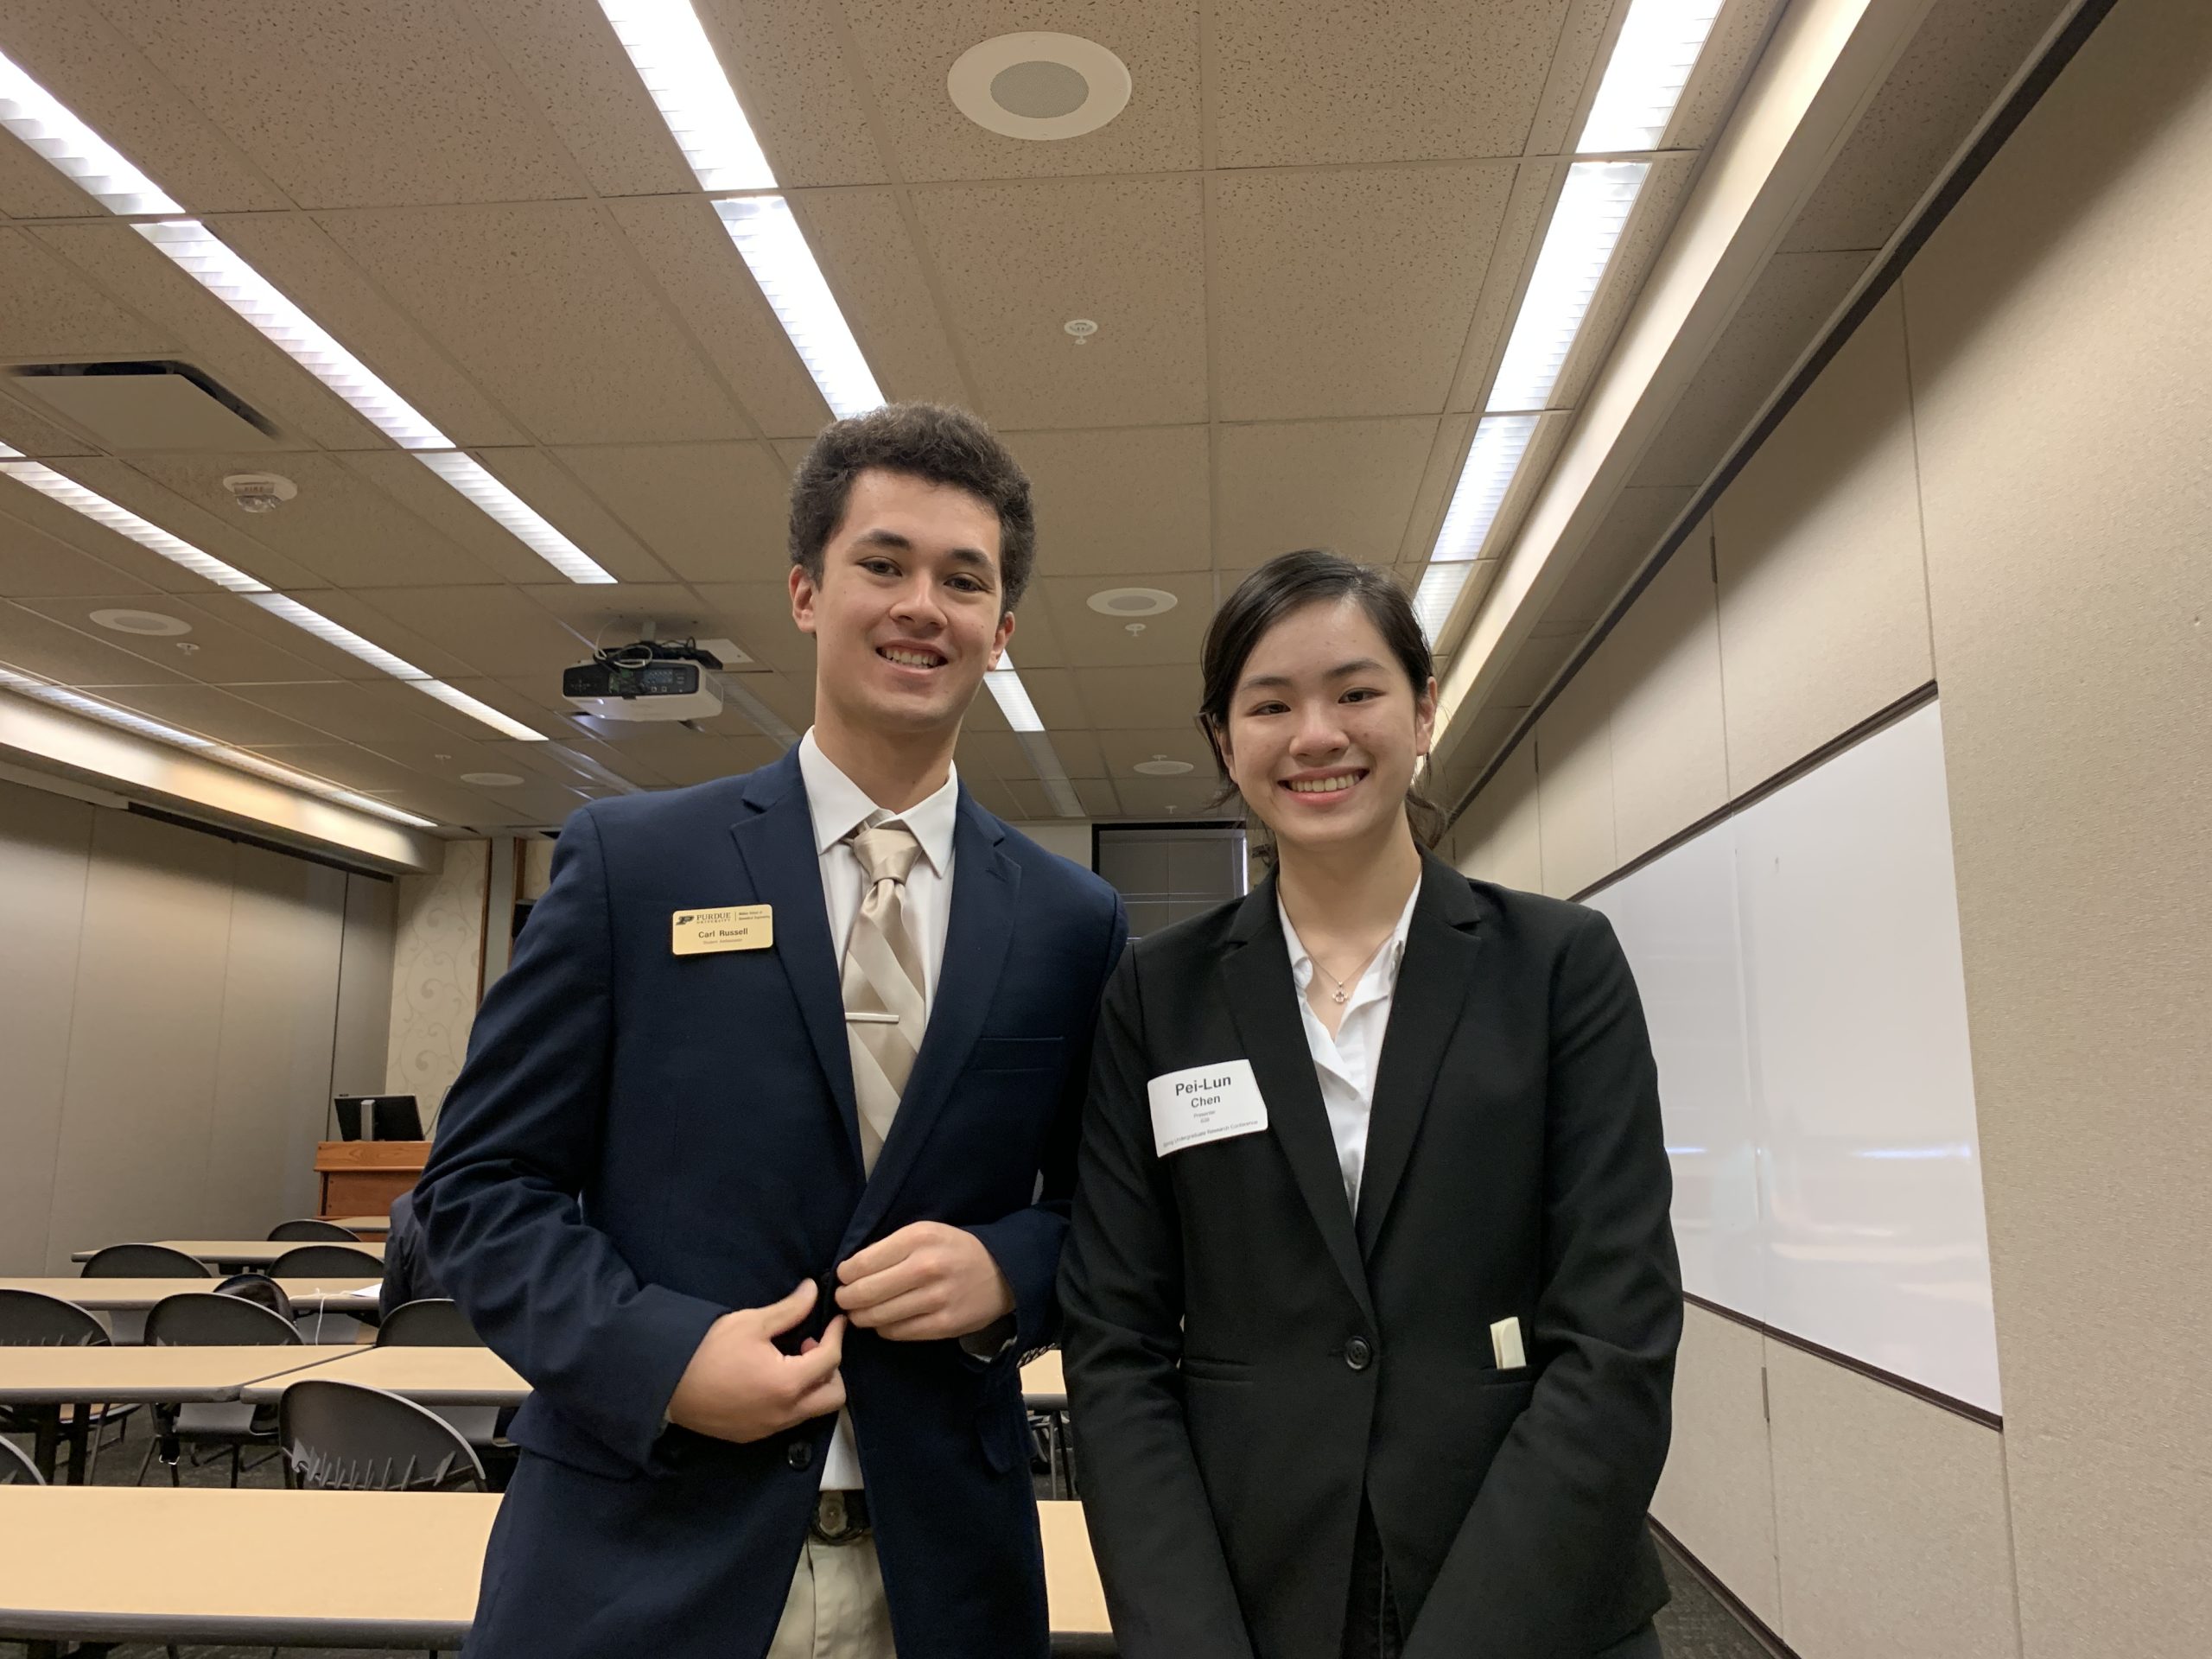 Carl Russel III and Pei-Lun (Patricia) Chen awarded Best Abstract in the Innovative Design, Technology, and Entrepreneurship category of 2022 Purdue Undergrad Research Conference!